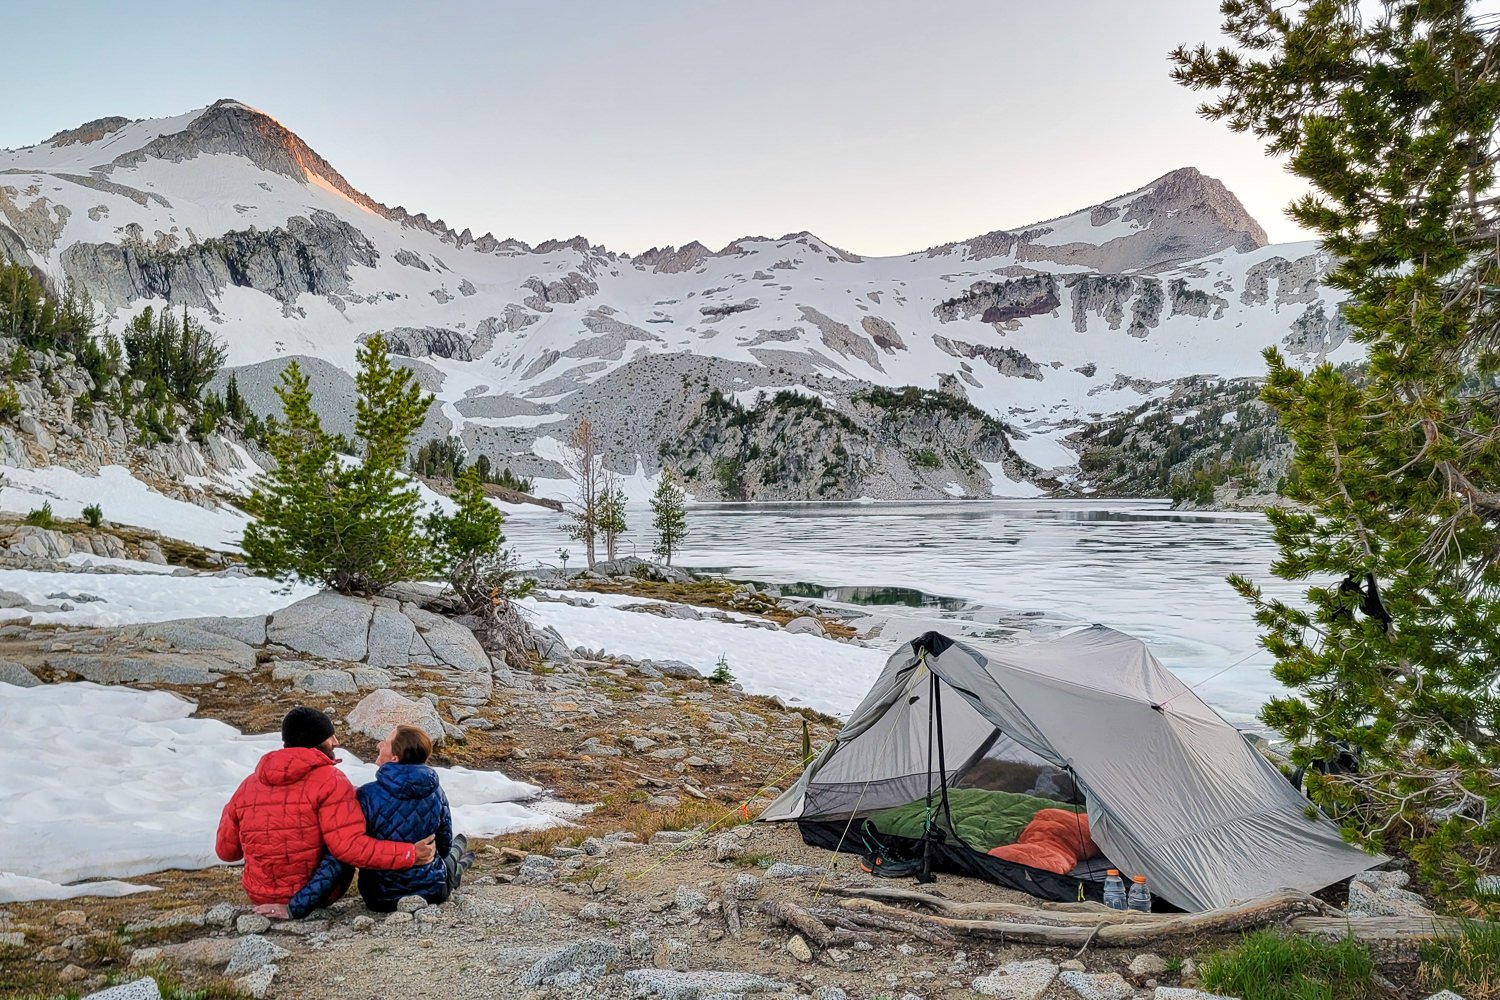 A backpacker couple sitting next to the Lunar Duo tent near a snowy lake at the foot of Eagle Cap Mountain